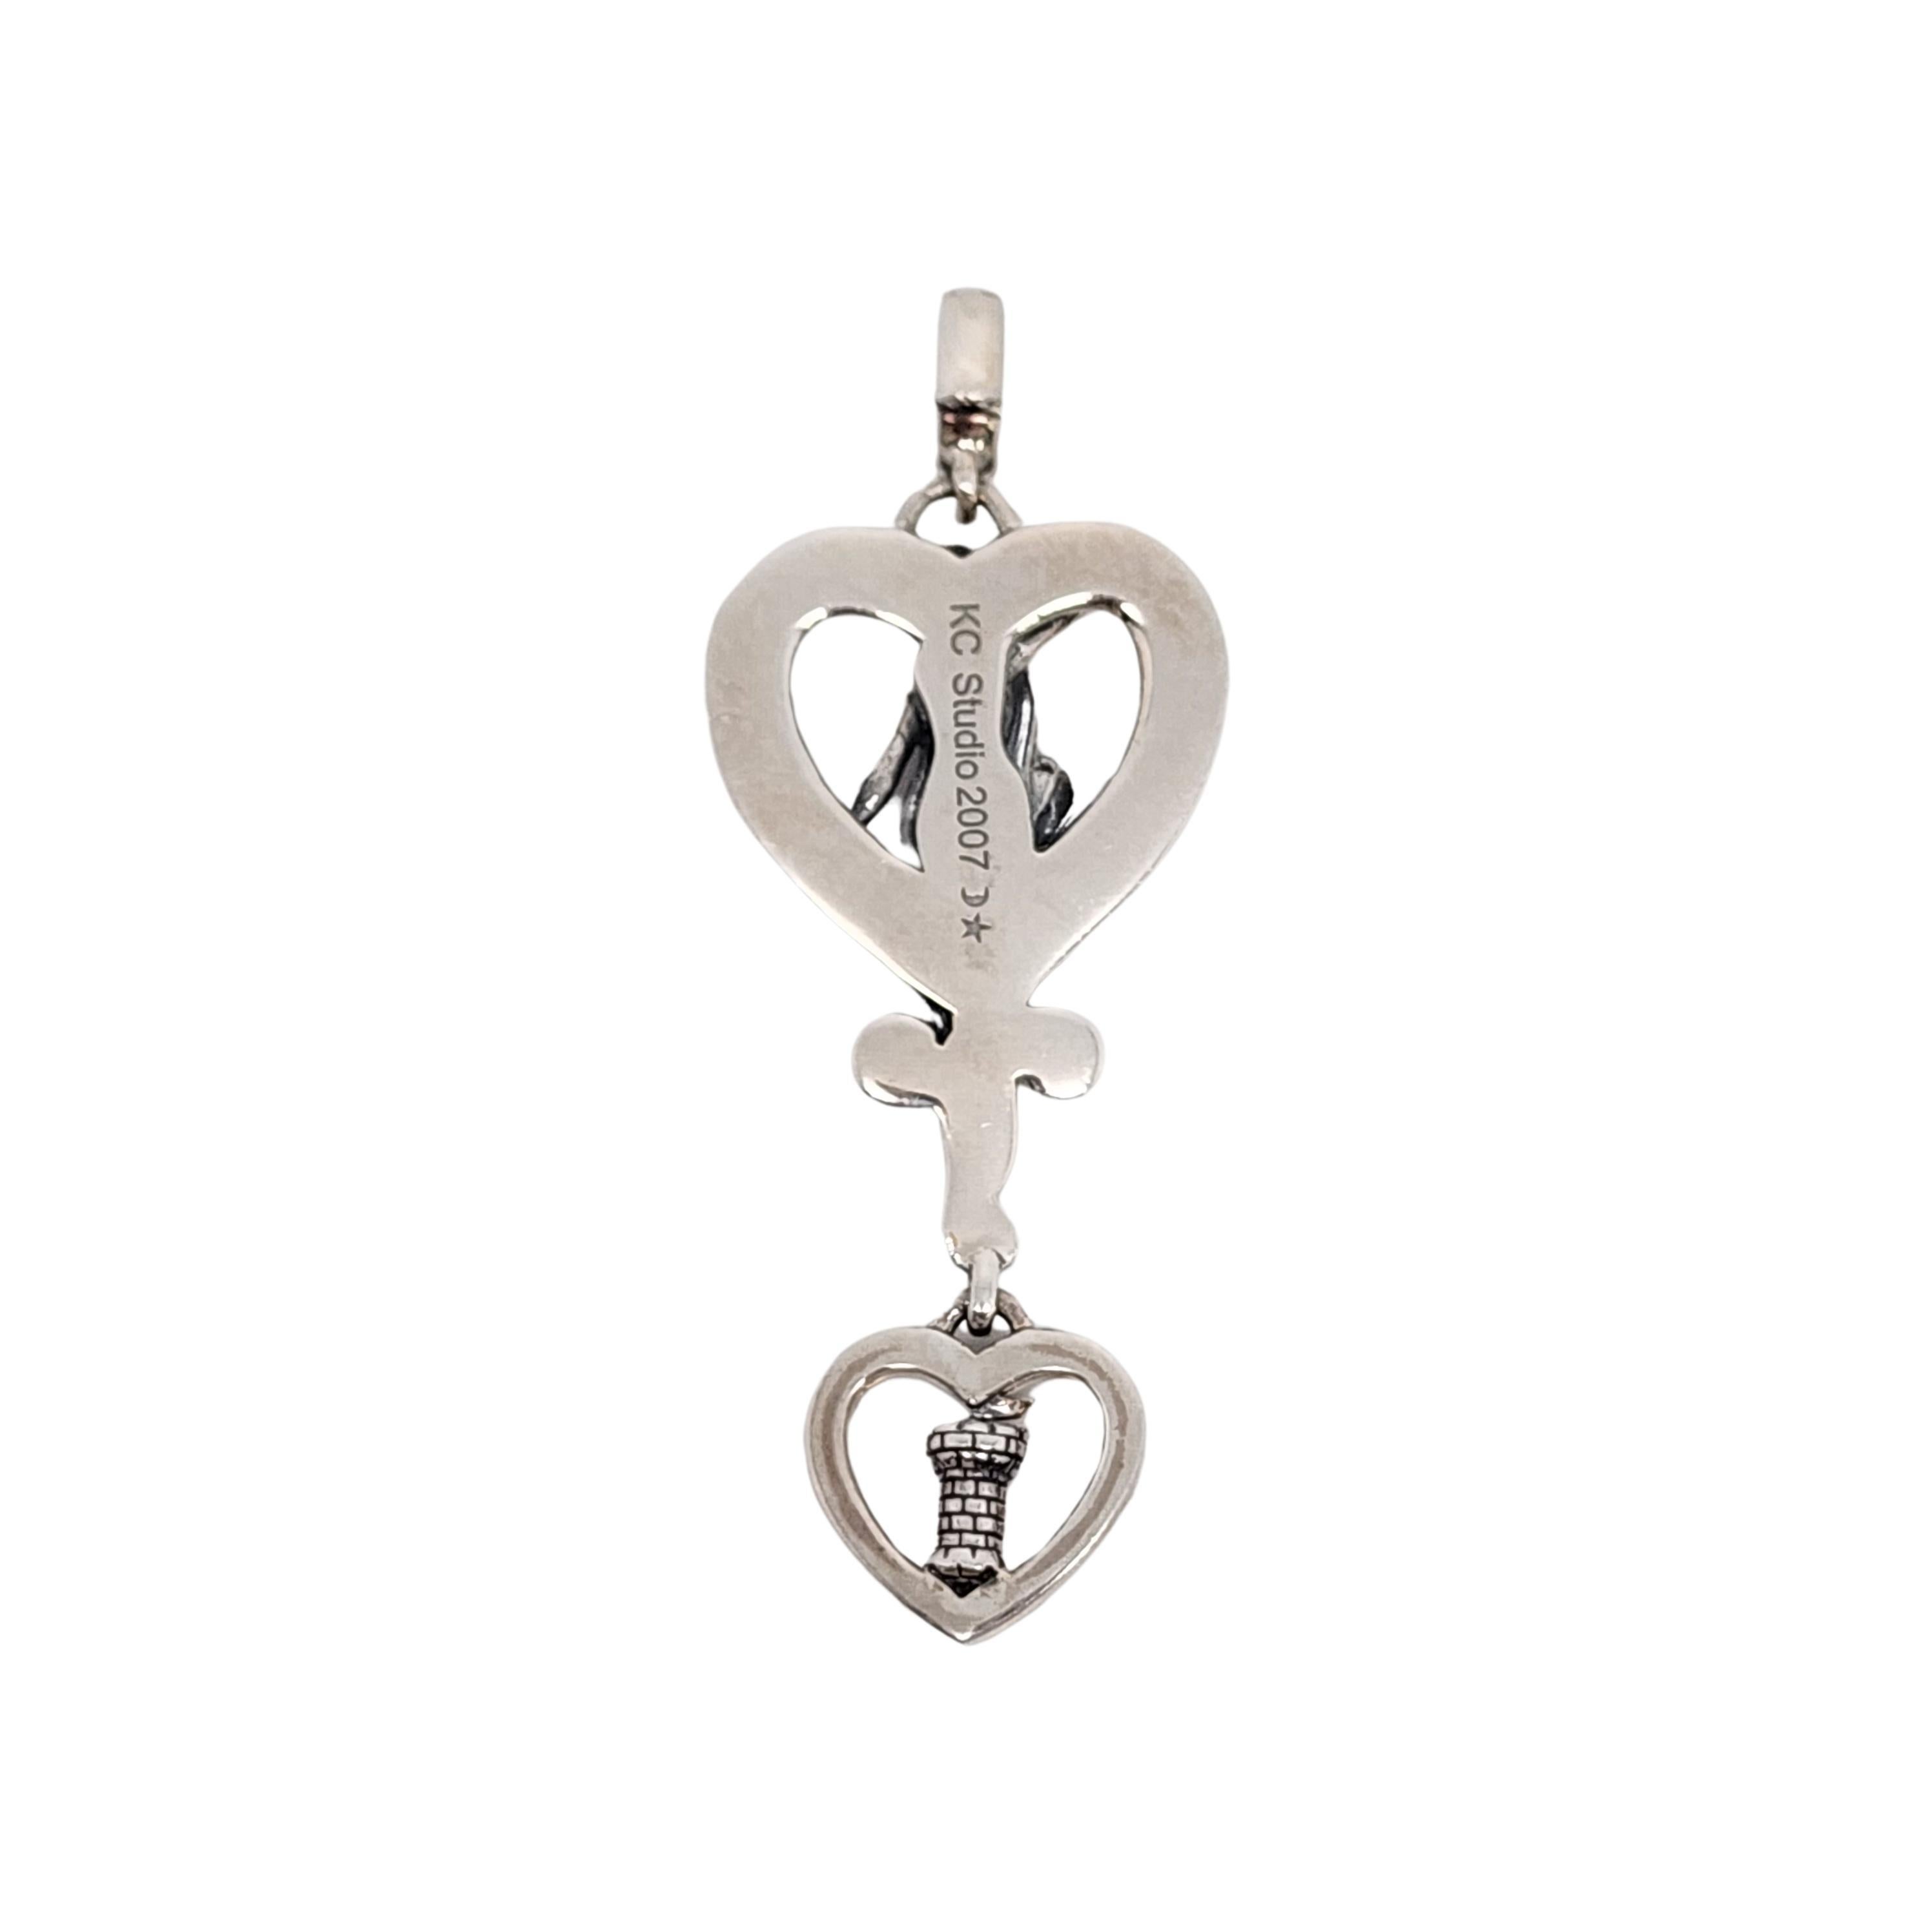 KC Studio sterling silver Rapunzel Love pendant by designer Barry Kieselstein-Cord.

This Rapunzel pendant features a woman with long hair in the shape of a heart around her. A smaller heart dangles with a small castle at its center with different